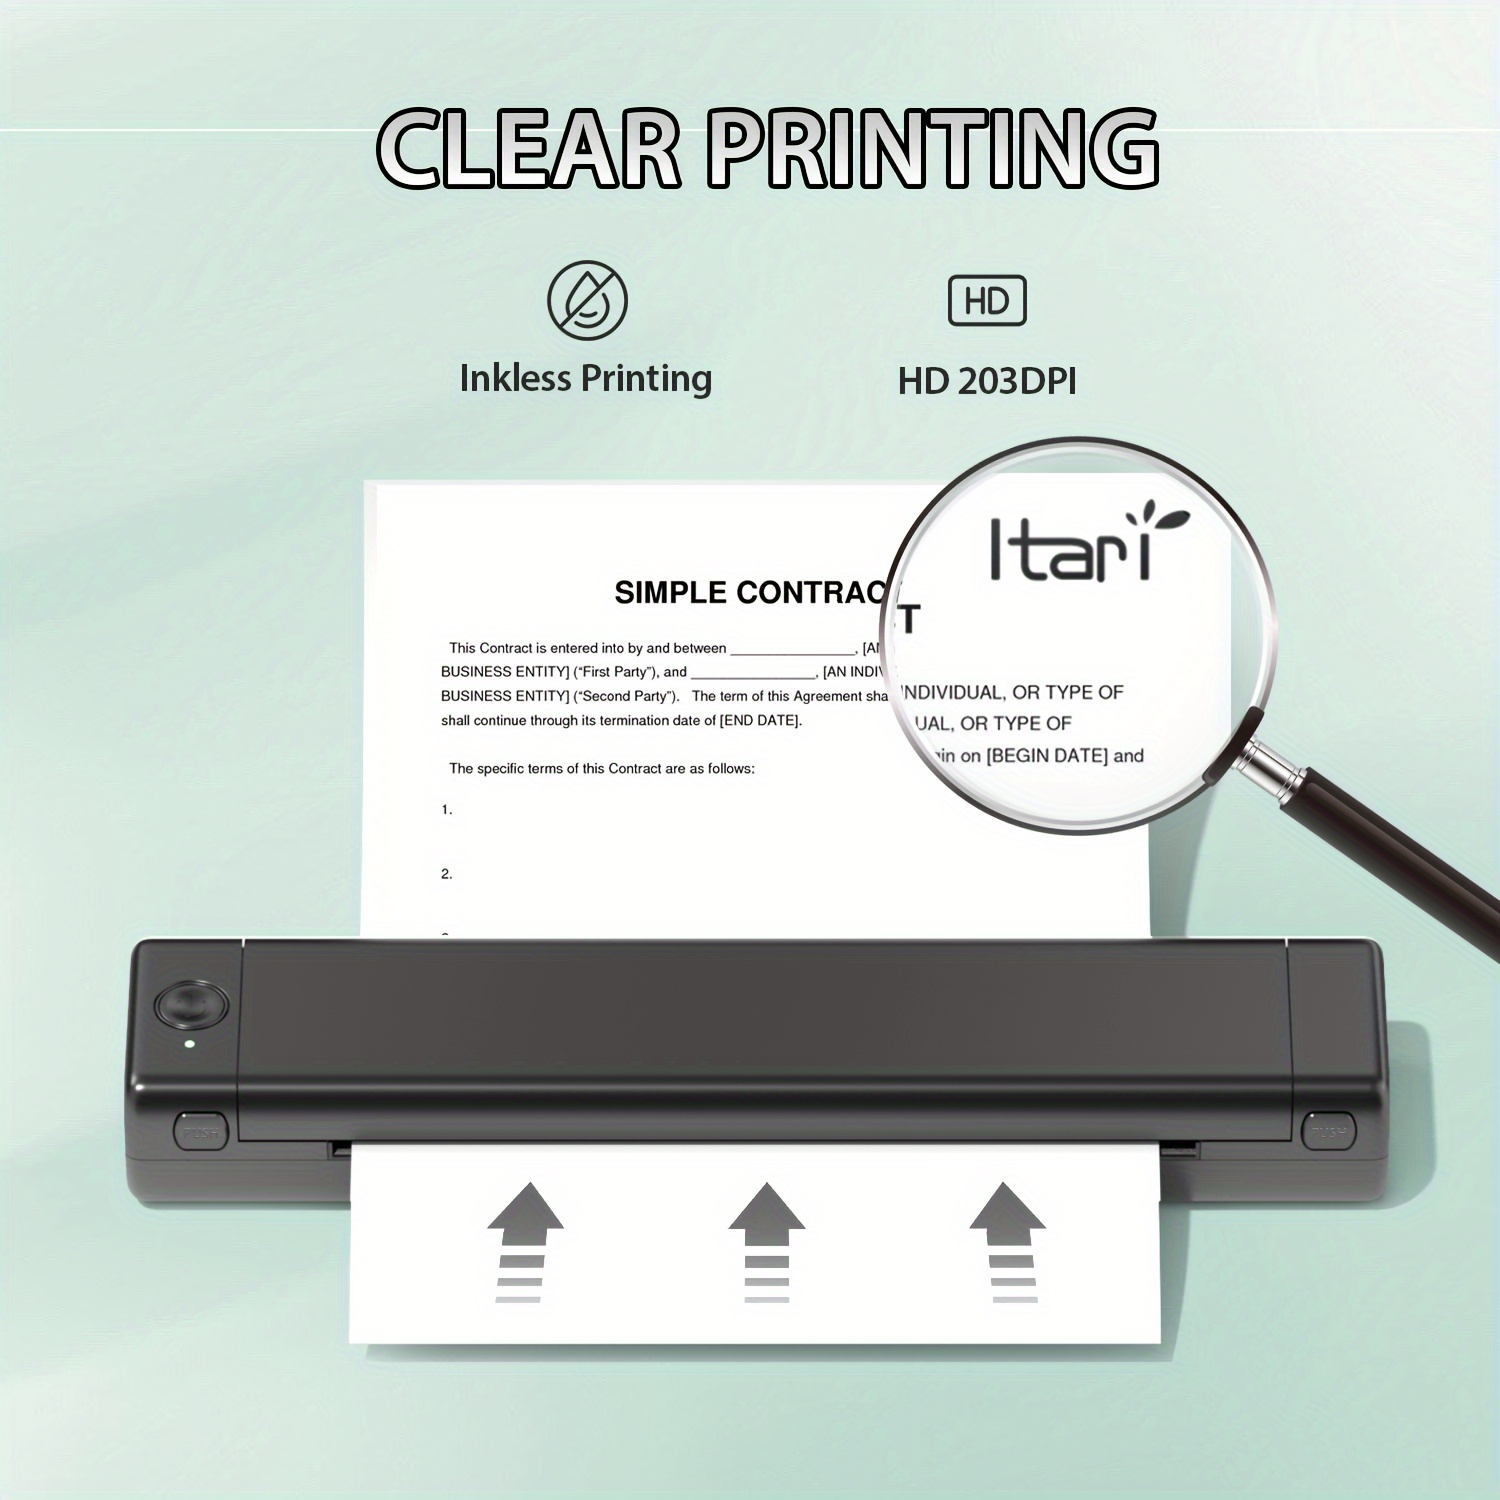 Itari M08F Portable Tattoo Stencil-Printer - Bluetooth Wireless Thermal  Printer for Travel, Compact Inkless Printer Support Phone & Laptop, Small